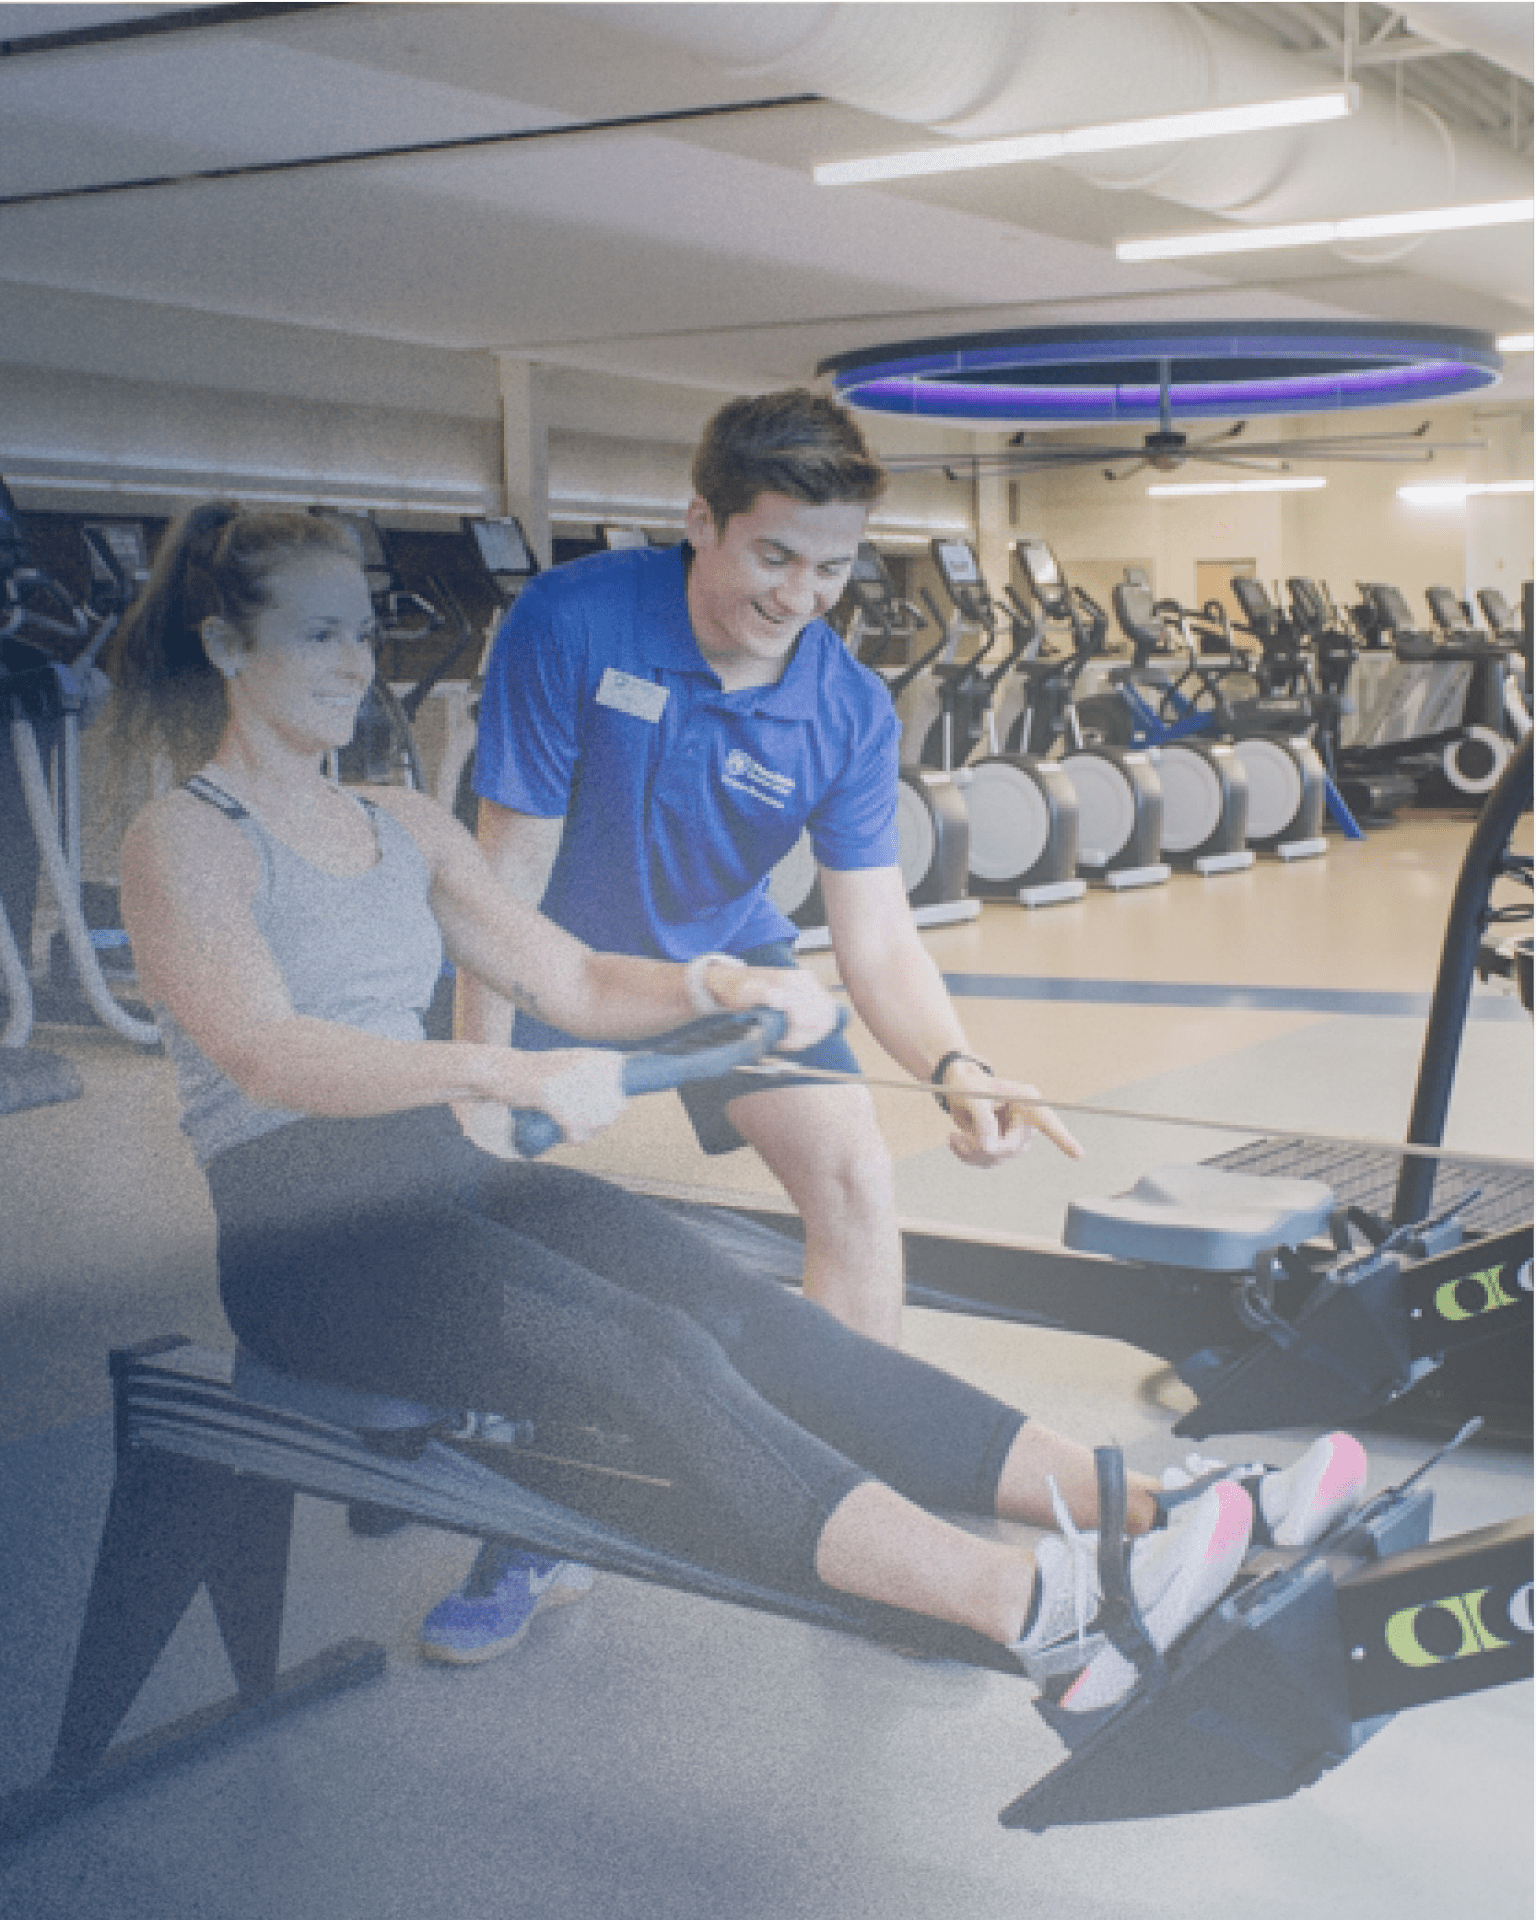 Personal trainer helping a client at a campus gym